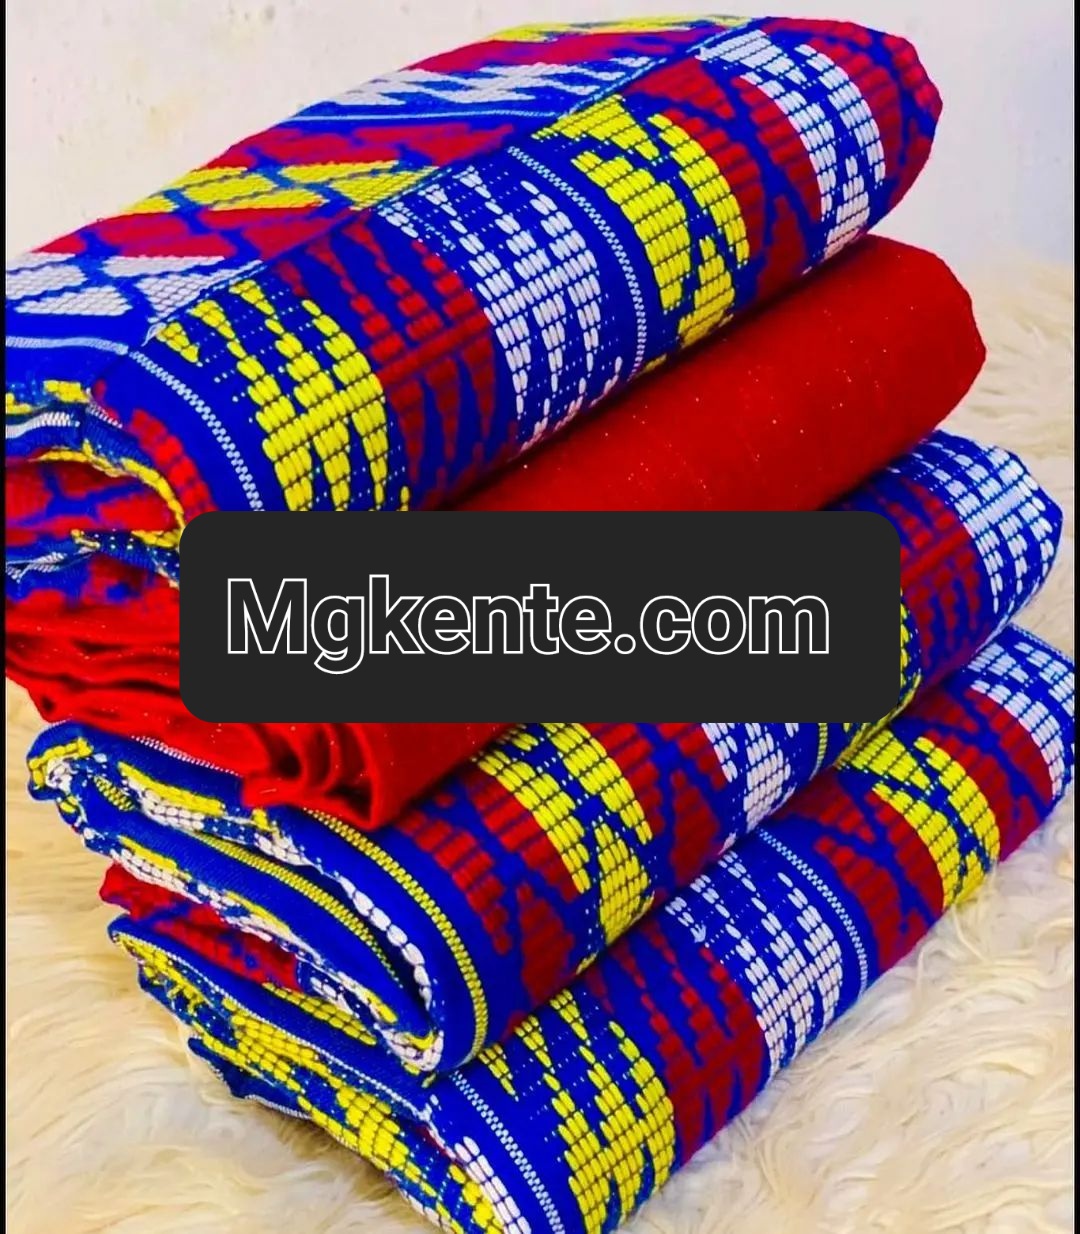 Authentic Hand Weaved Kente Cloth A3002